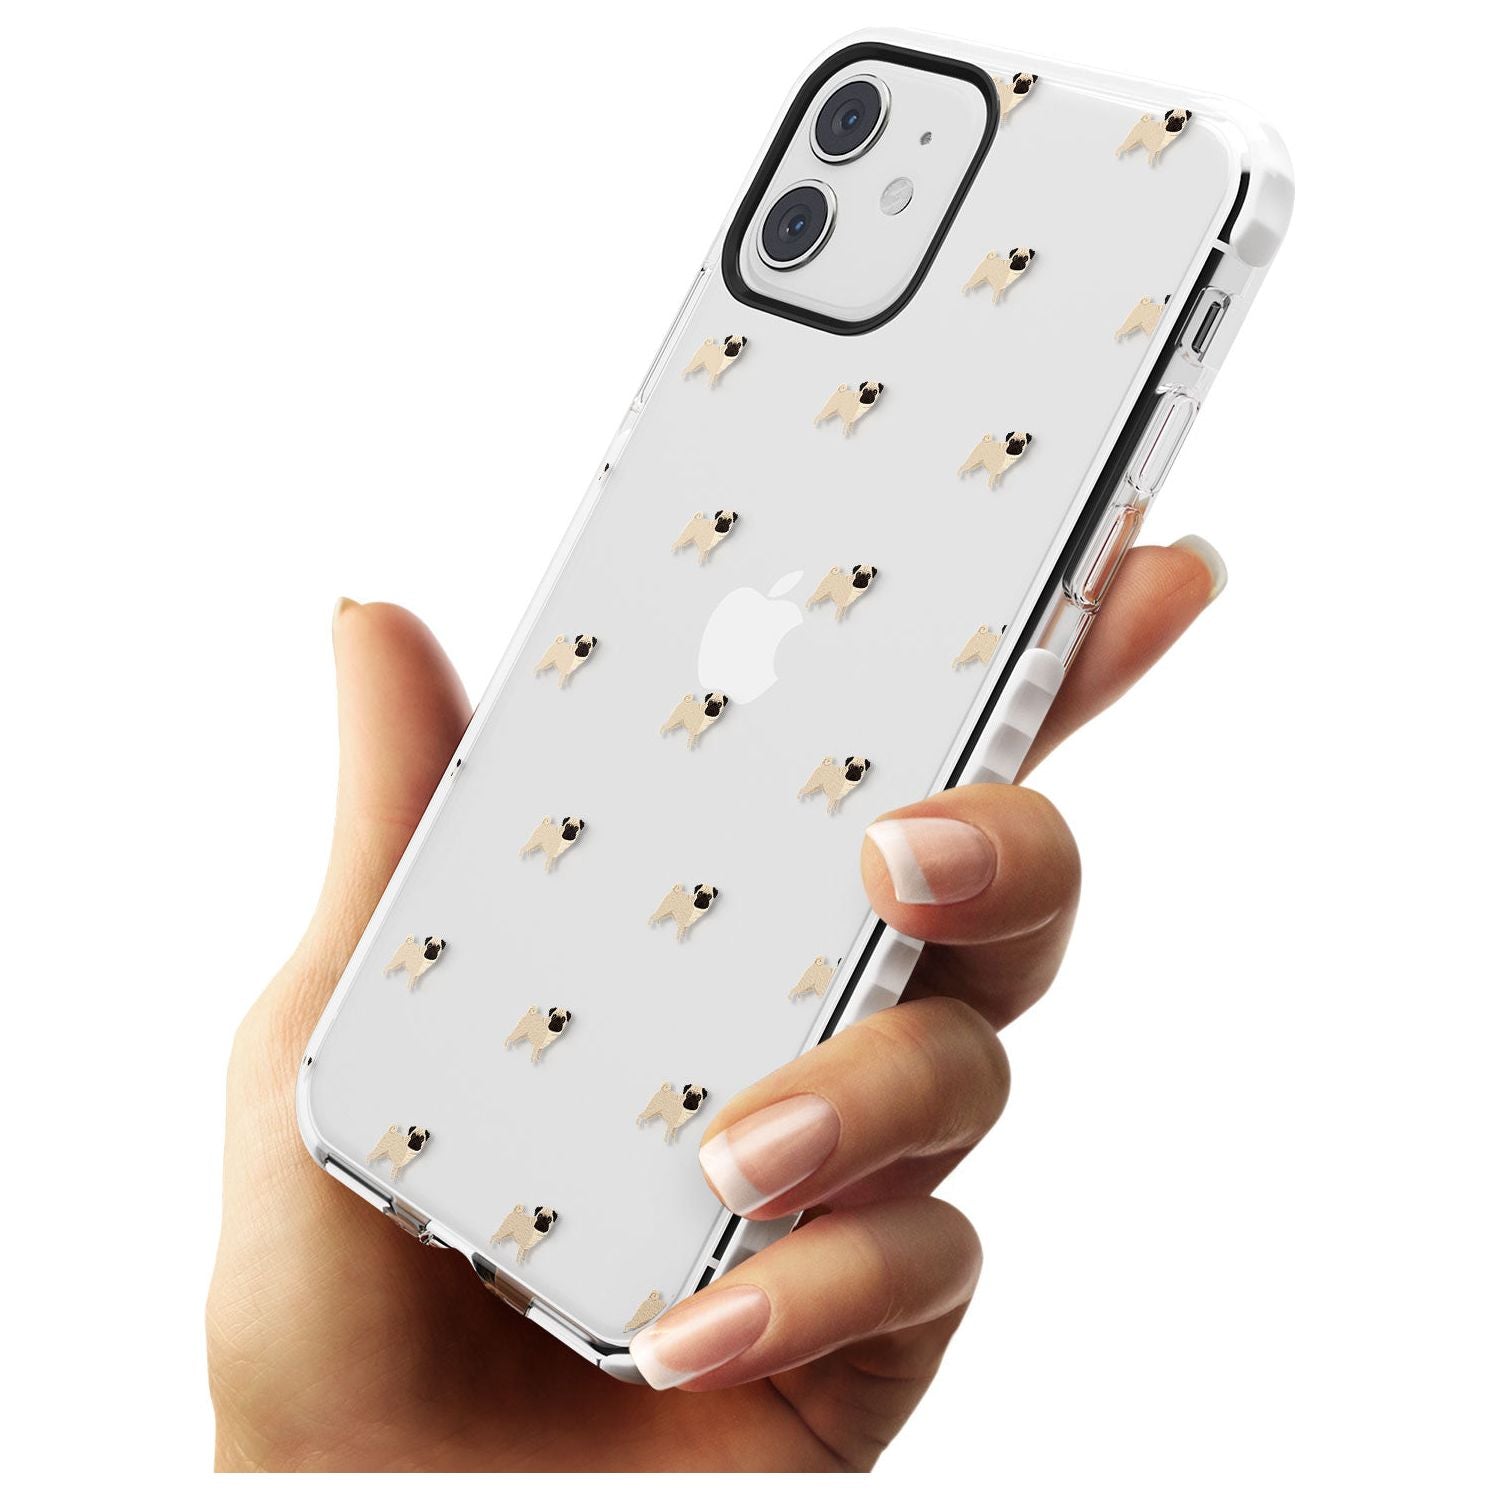 Pug Dog Pattern Clear Impact Phone Case for iPhone 11